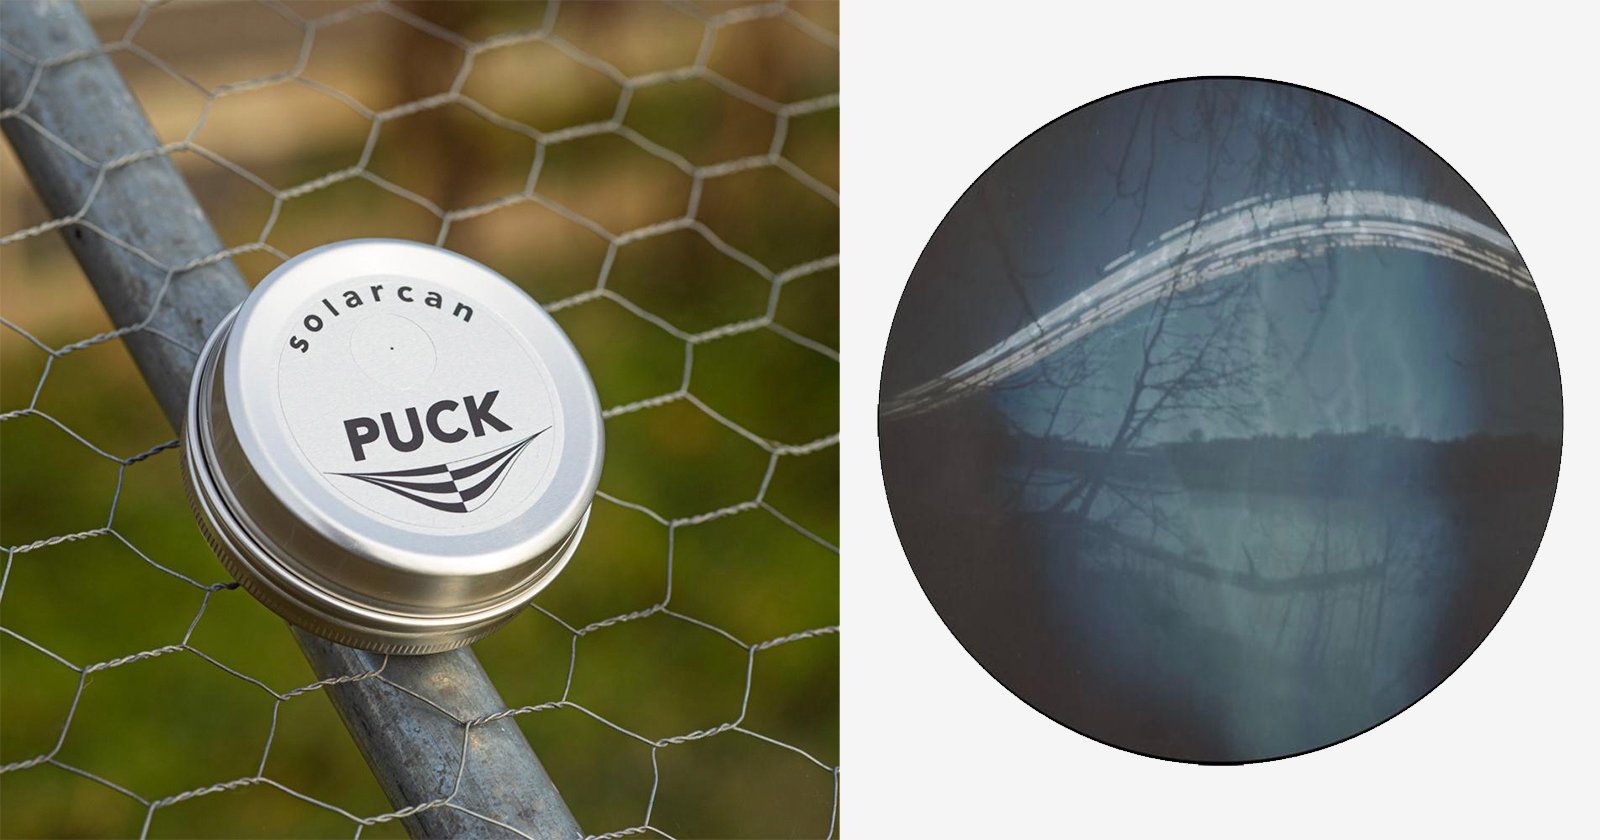 Picture - Solarcan Puck is a Limited-Time Palm-Sized Pinhole Solargraph Camera